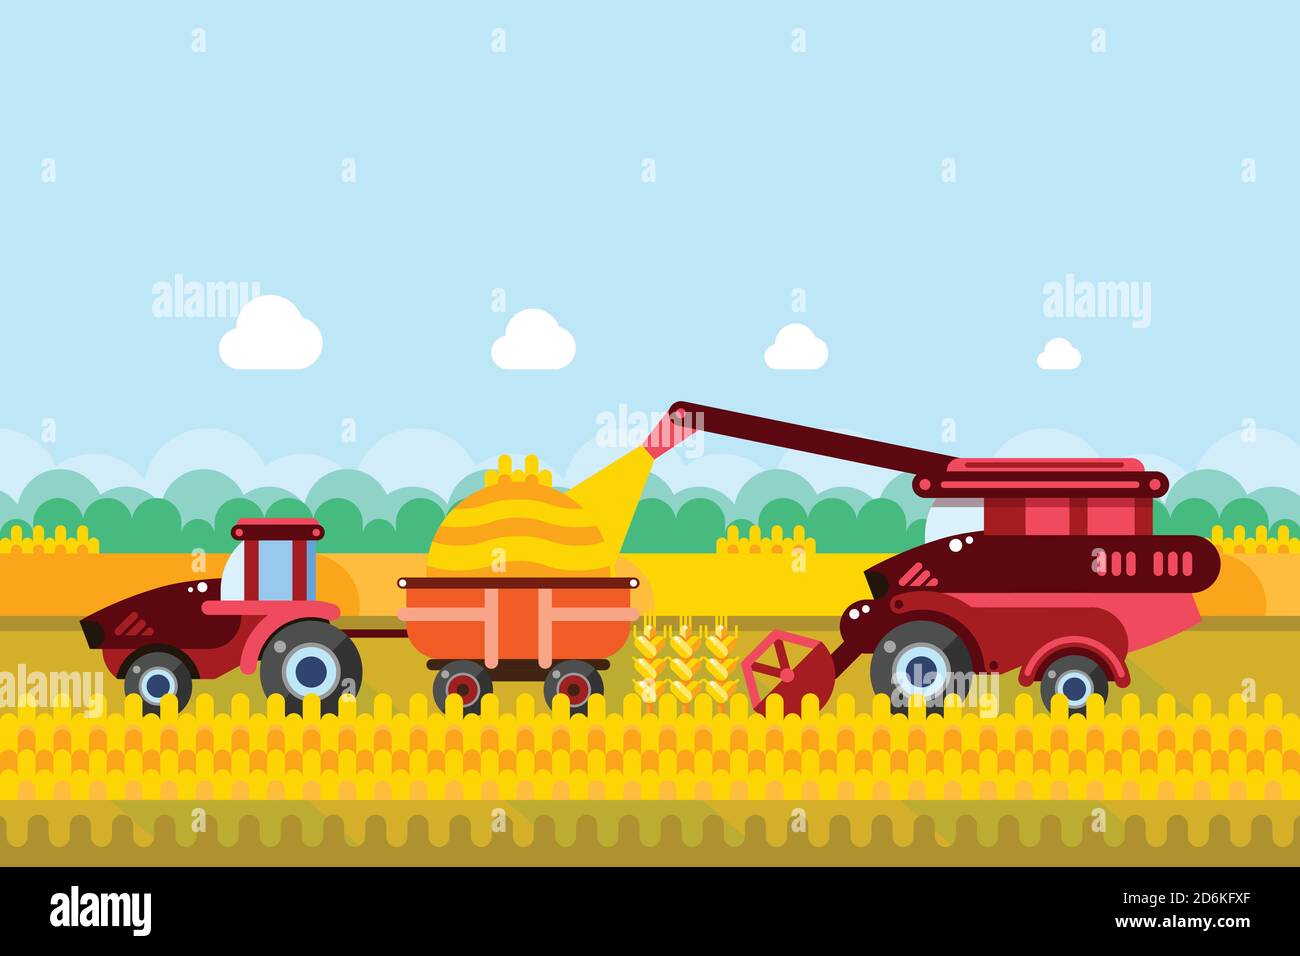 Farming and agriculture harvesting concept. Vector flat illustration of combine and tractor on wheat or corn cereal field. Rural farmland landscape ba Stock Vector